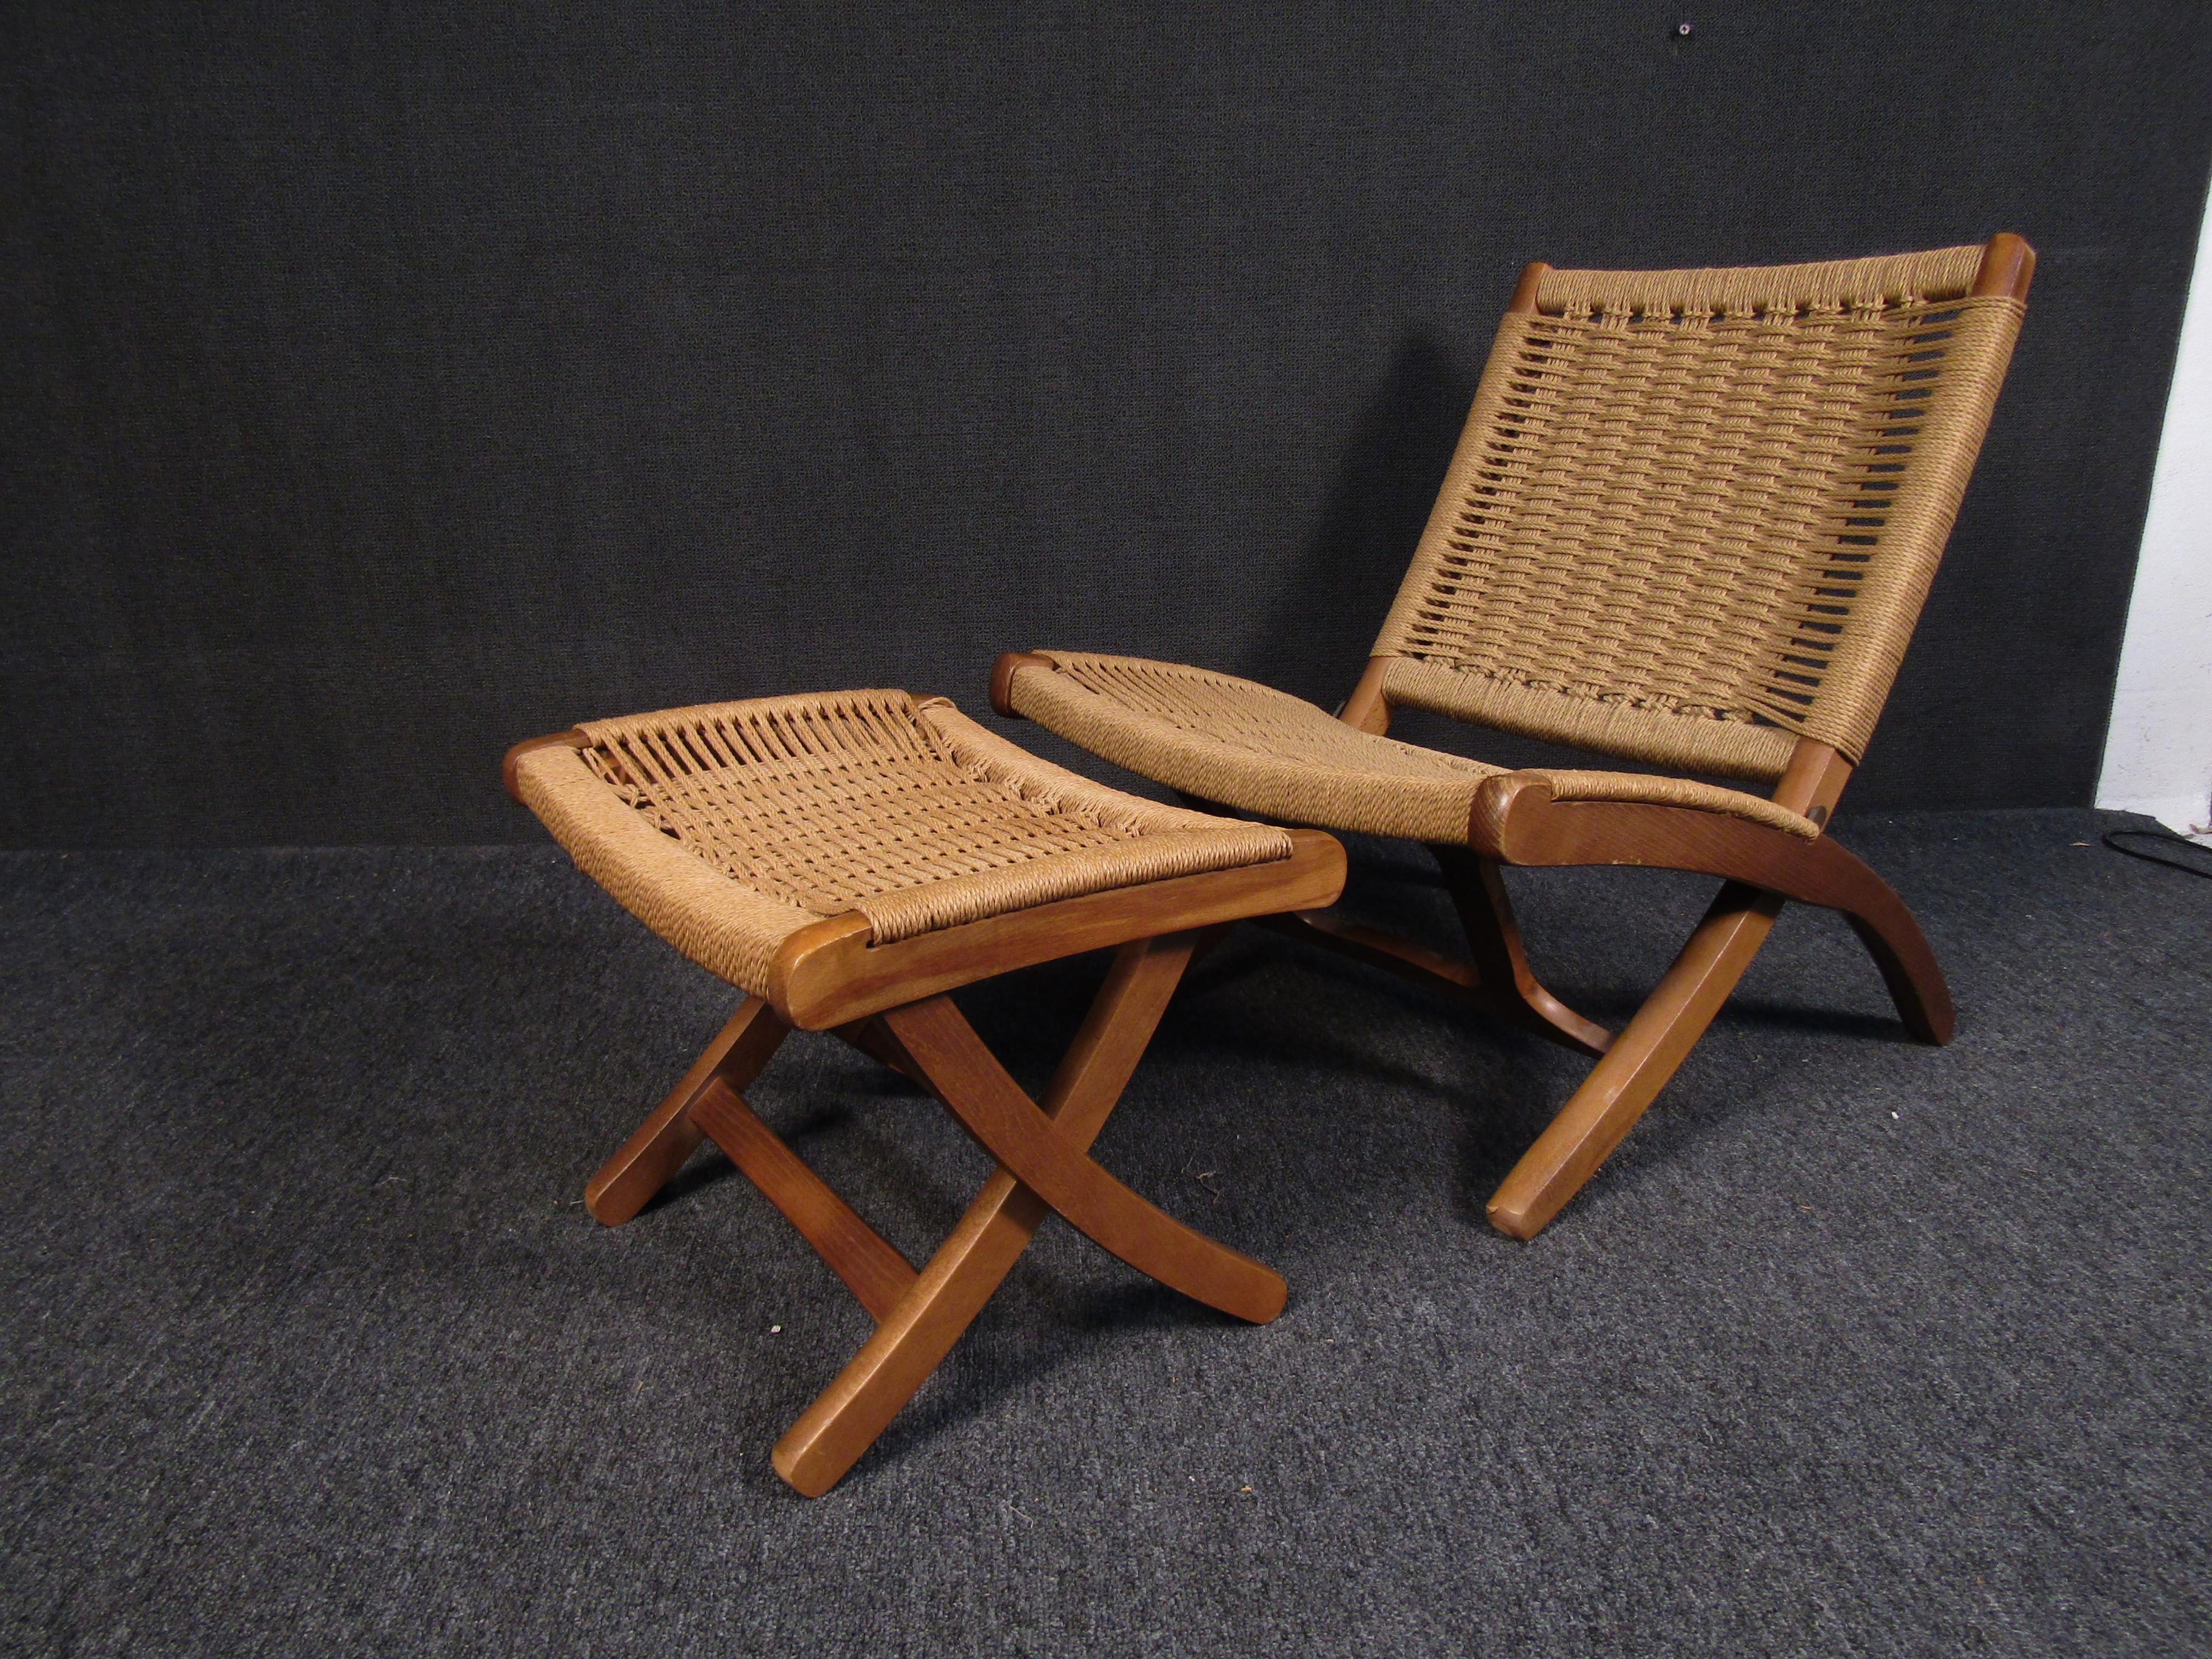 Vintage rope chair with ottoman combo. In overall good shape. 

Please confirm item location (NY or NJ).